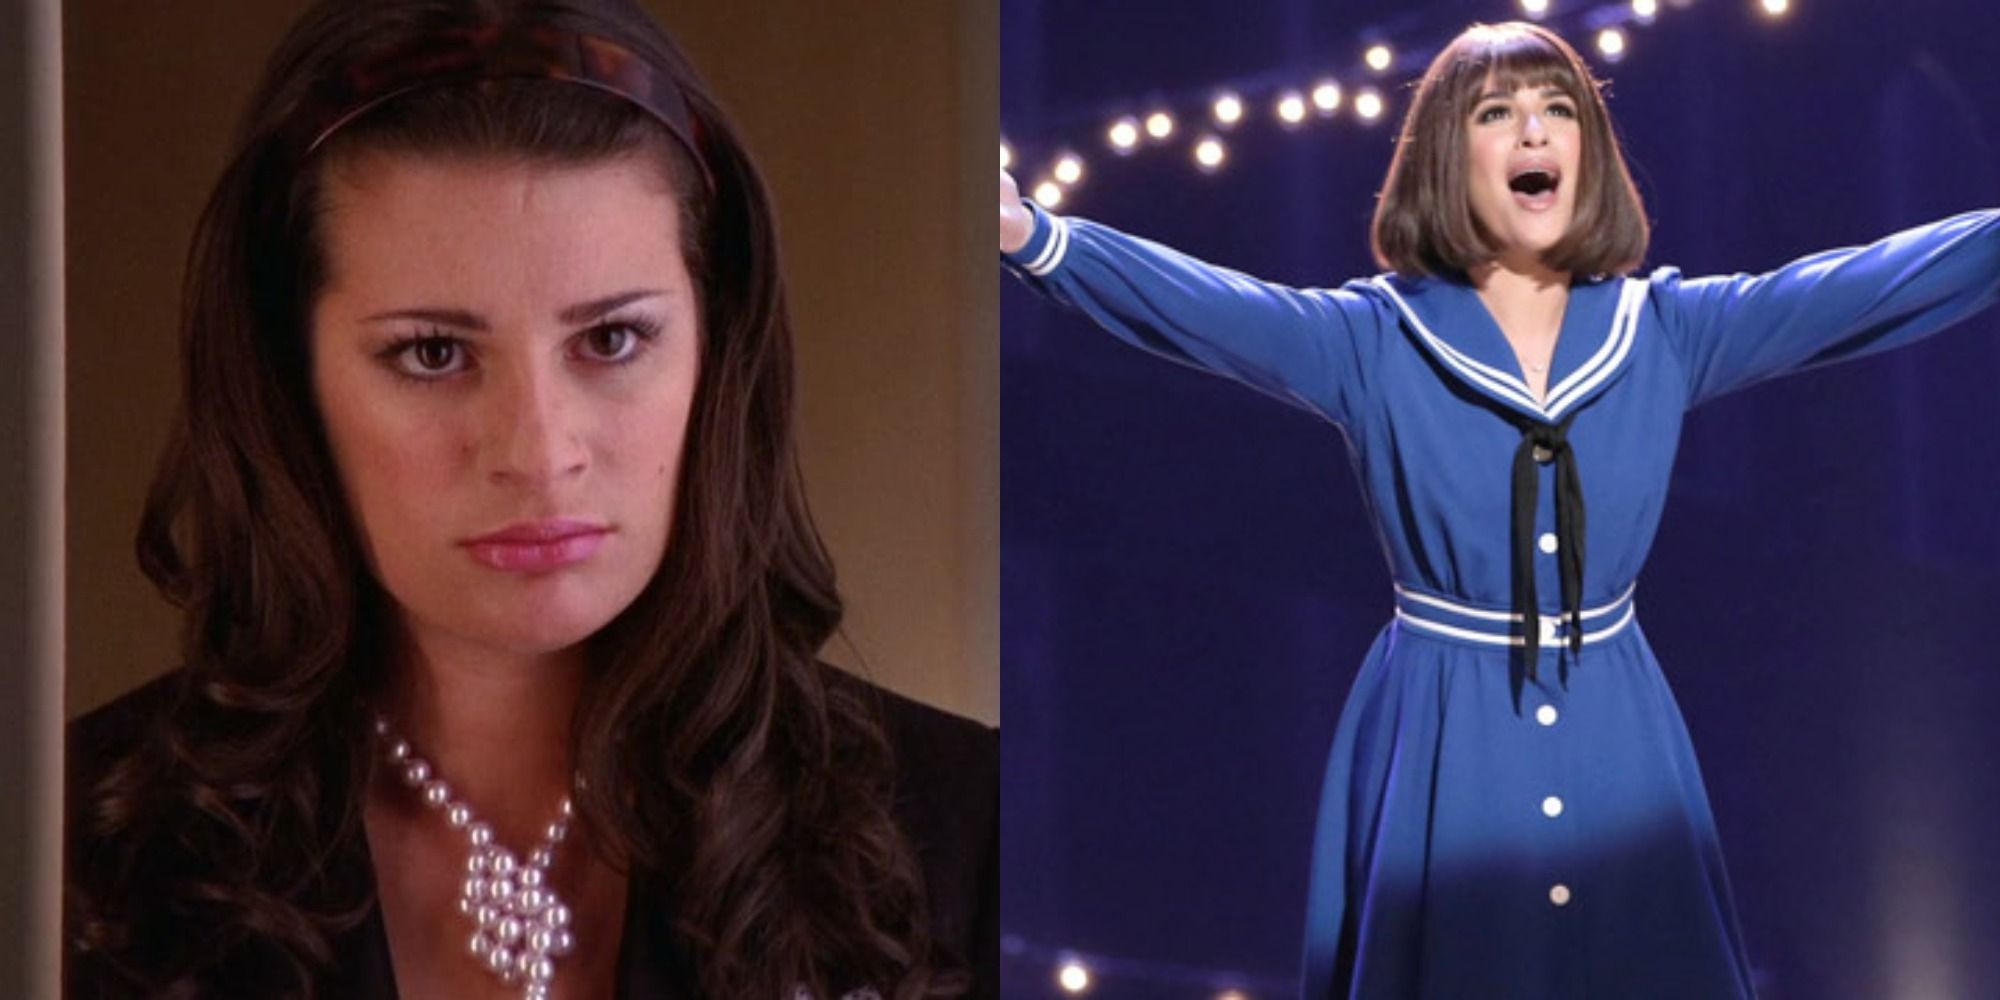 Split image showing Rachel Berry angry and as Fanny Brice on Broadway in Glee